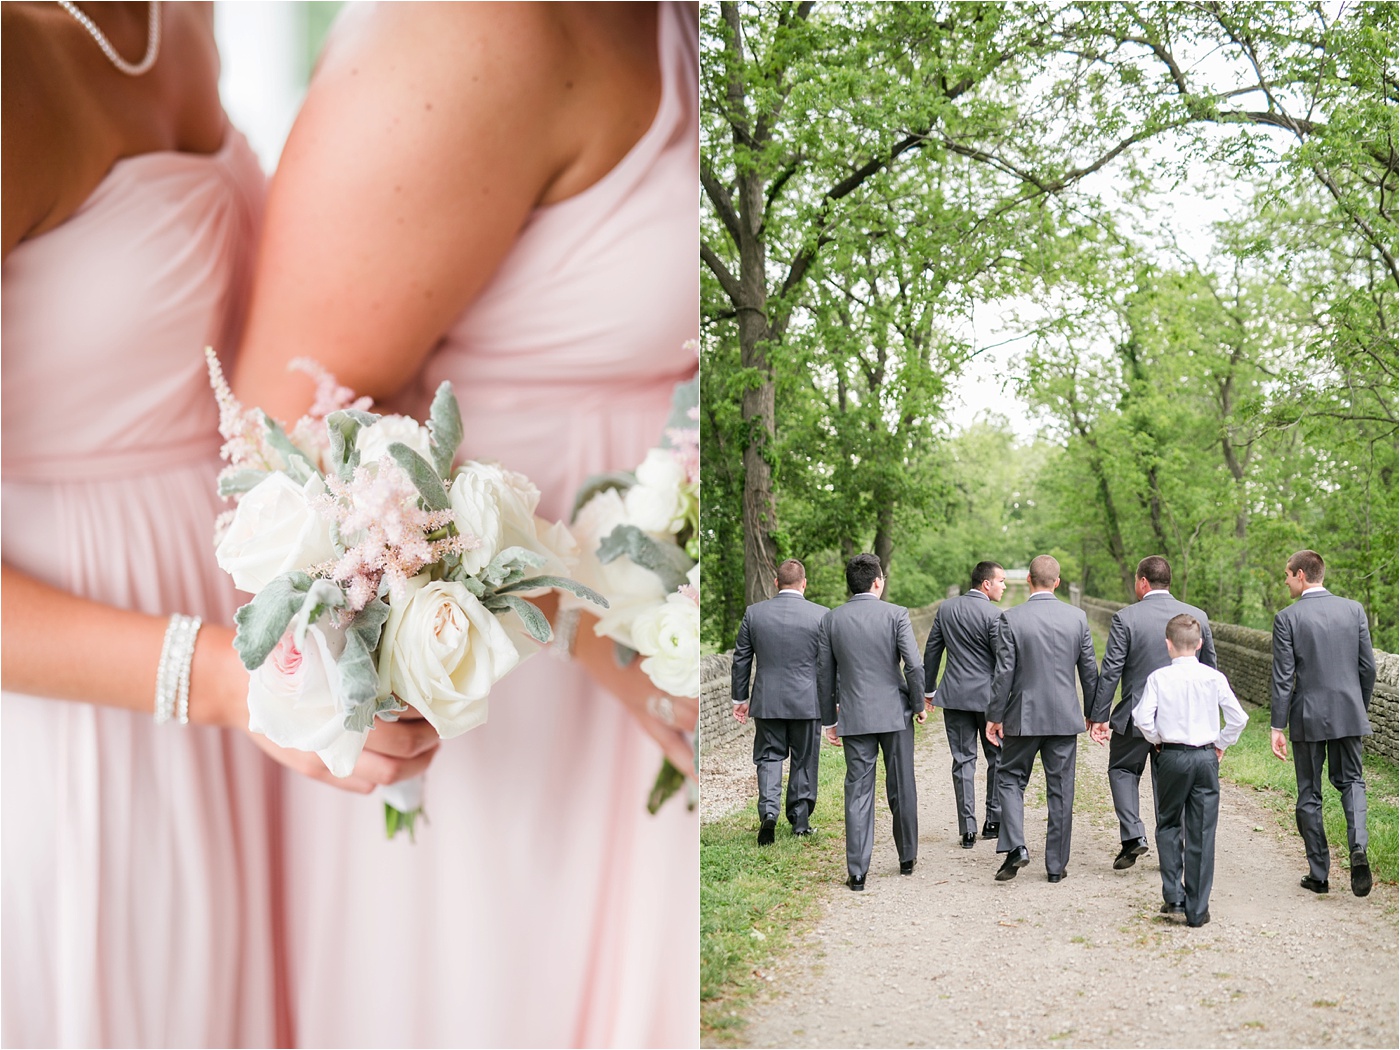 A Blush Outdoor wedding at Irongate Equestrian | KariMe Photography_0050